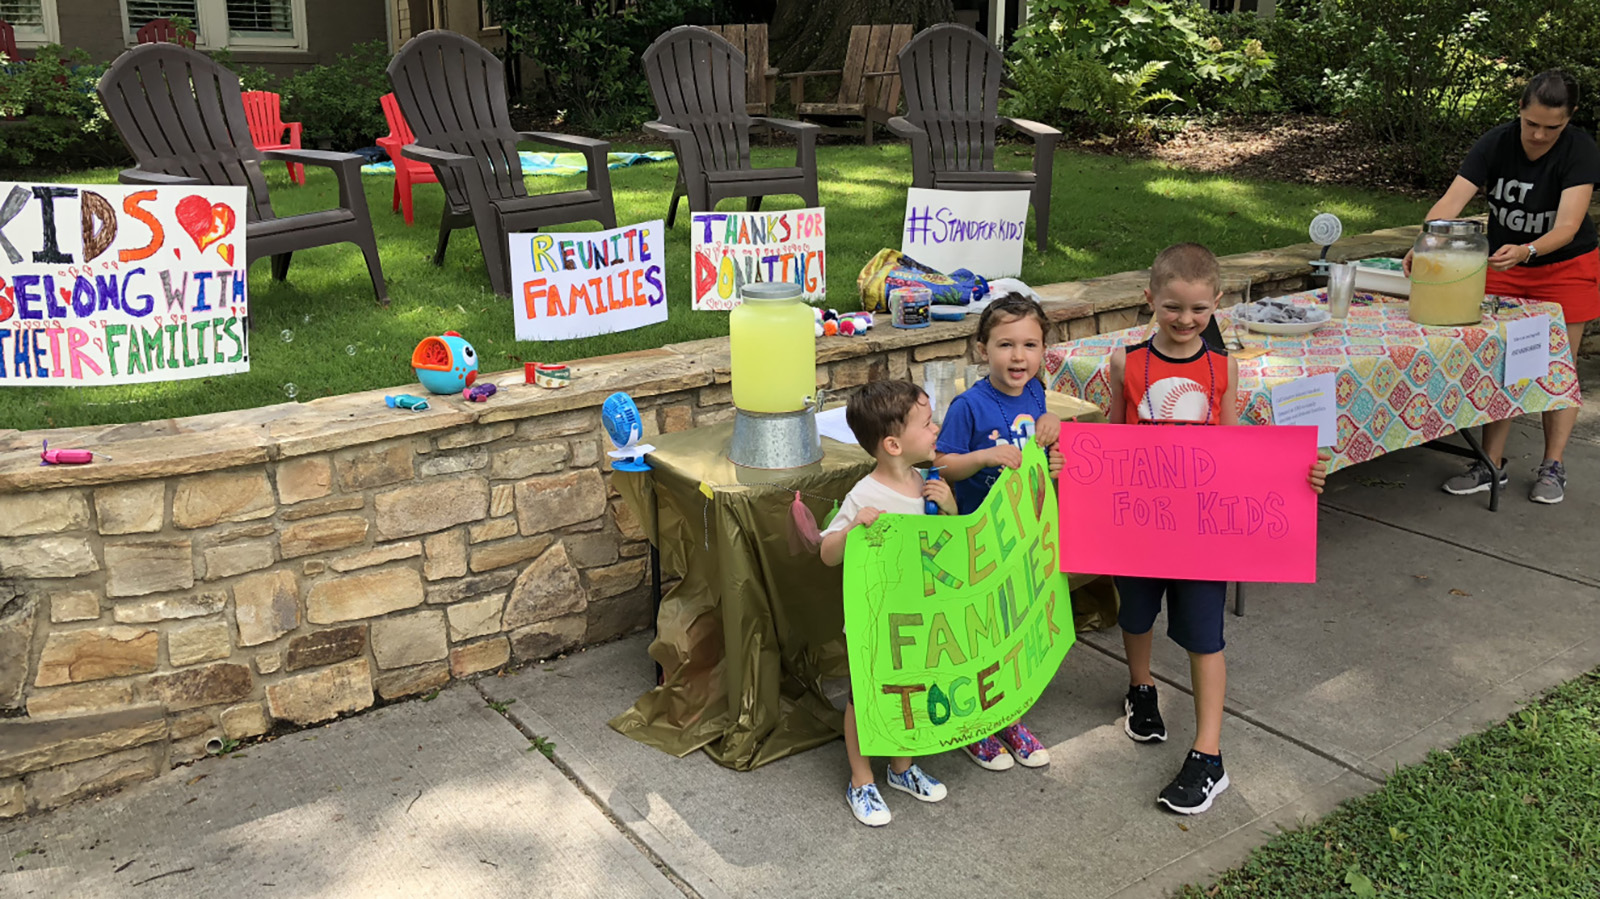 what to sell on lemonade stand for kids